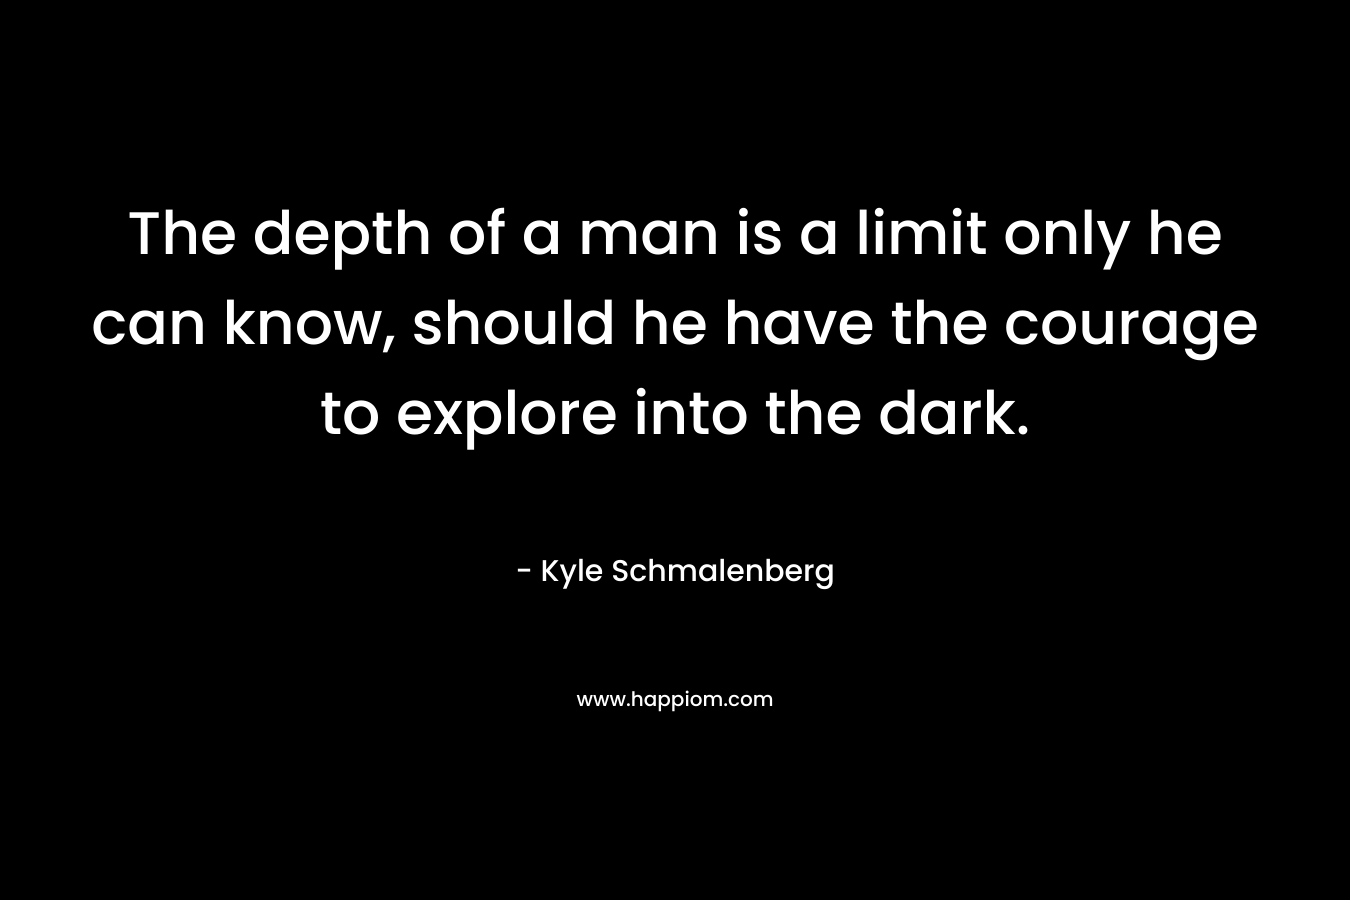 The depth of a man is a limit only he can know, should he have the courage to explore into the dark. – Kyle Schmalenberg